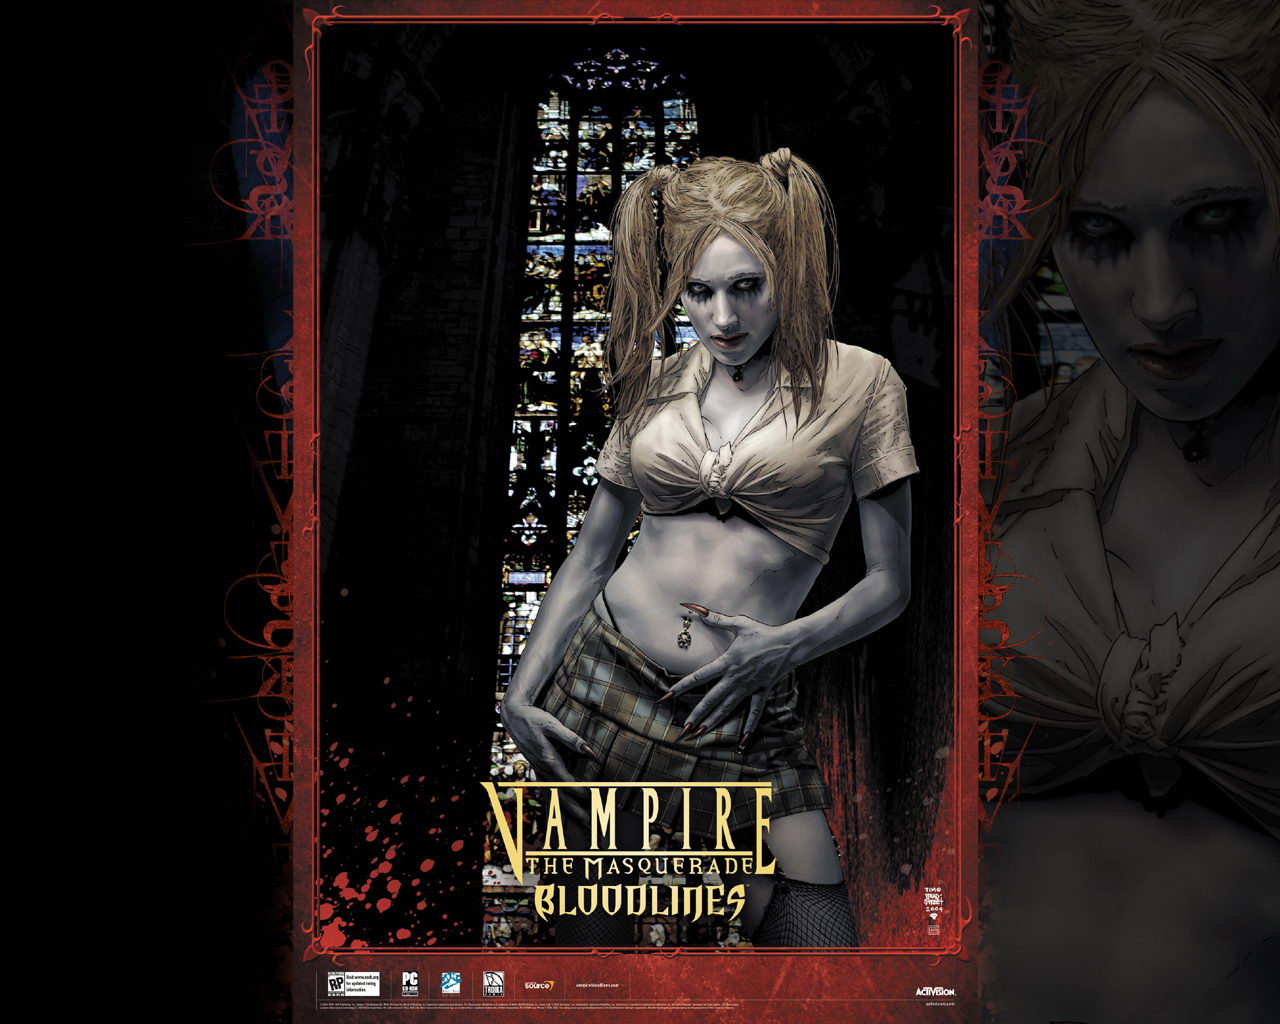 Vampire: The Masquerade – Bloodlines wallpaper - Game wallpapers